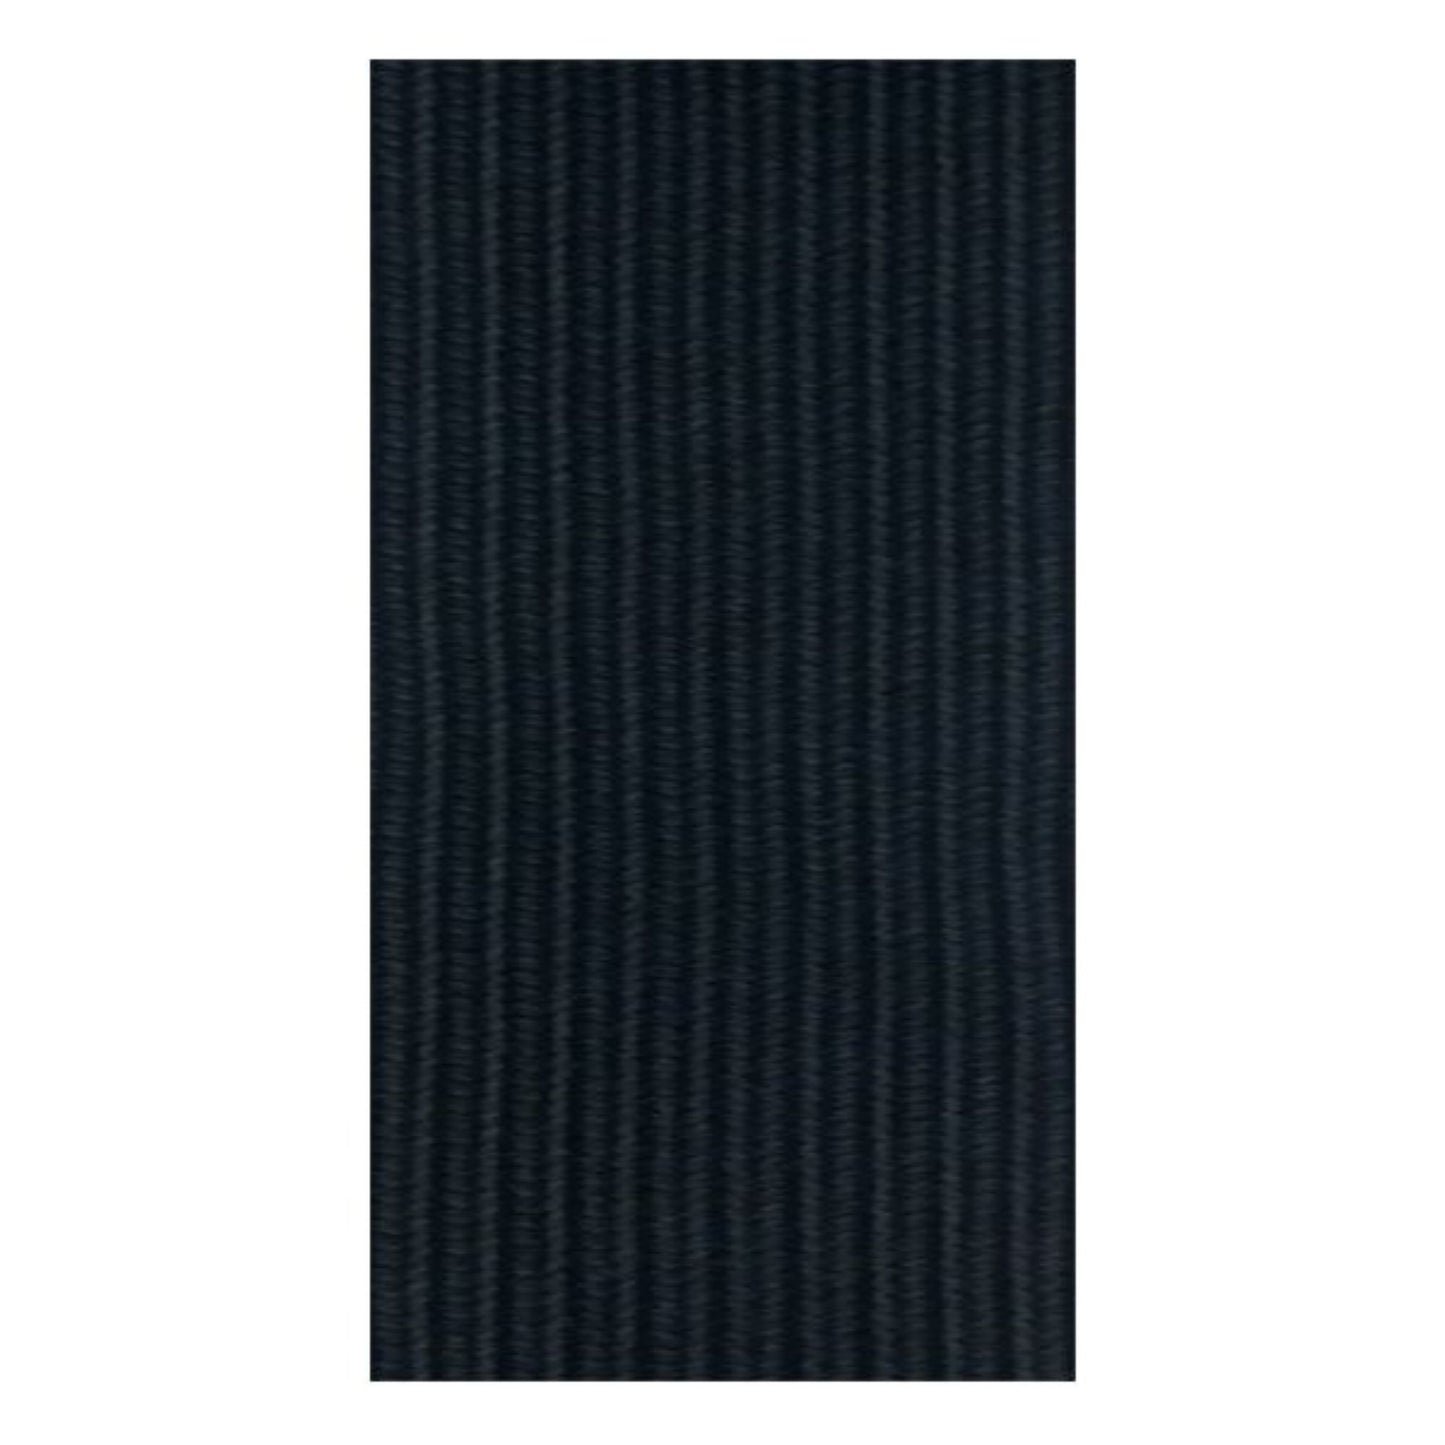 5-Inch Commercial Grade Black Knitted Elastic Band - Various Widths & Yards great for sewing making clothes